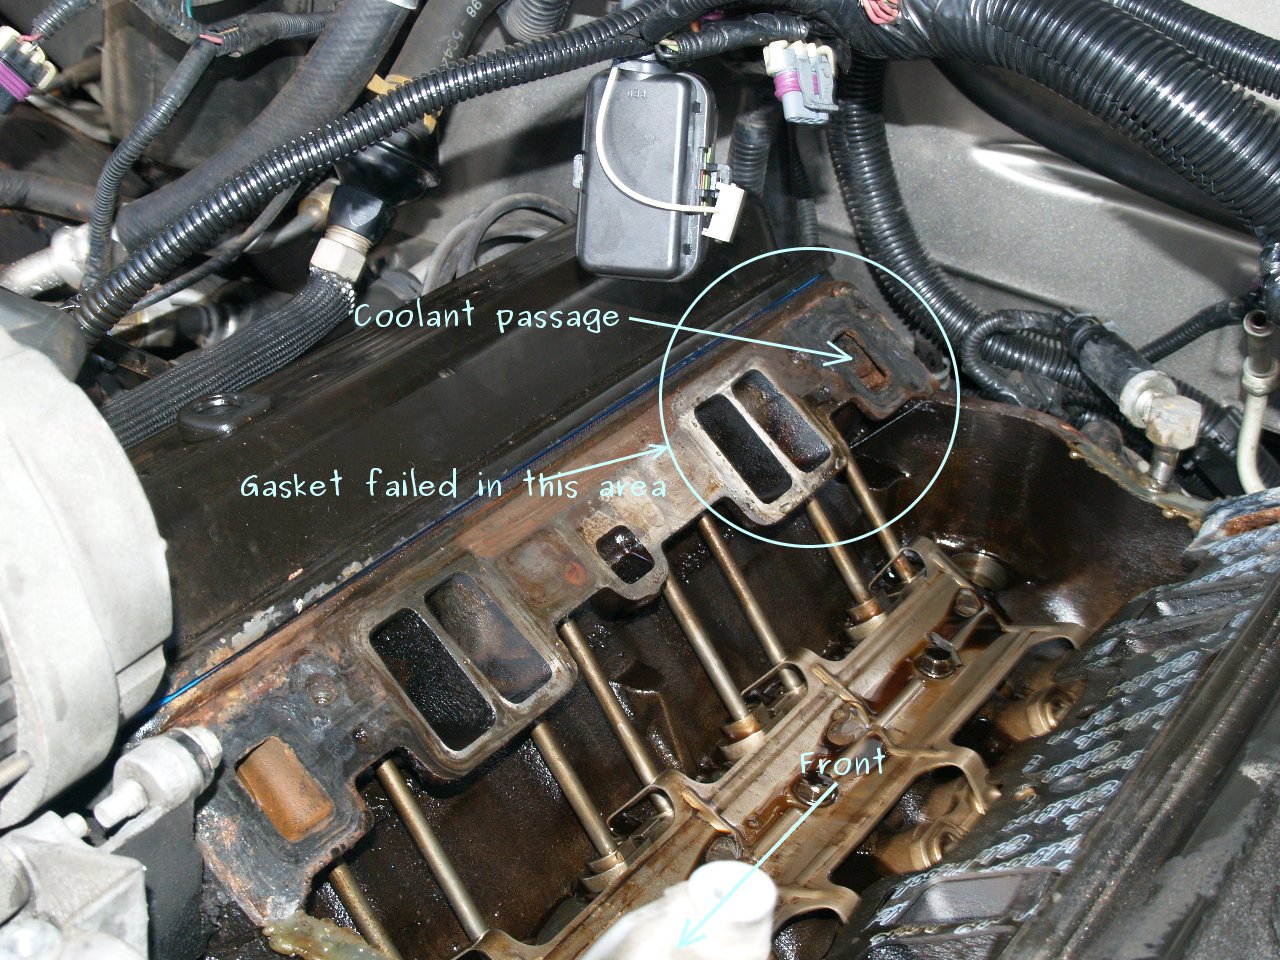 See P0227 in engine